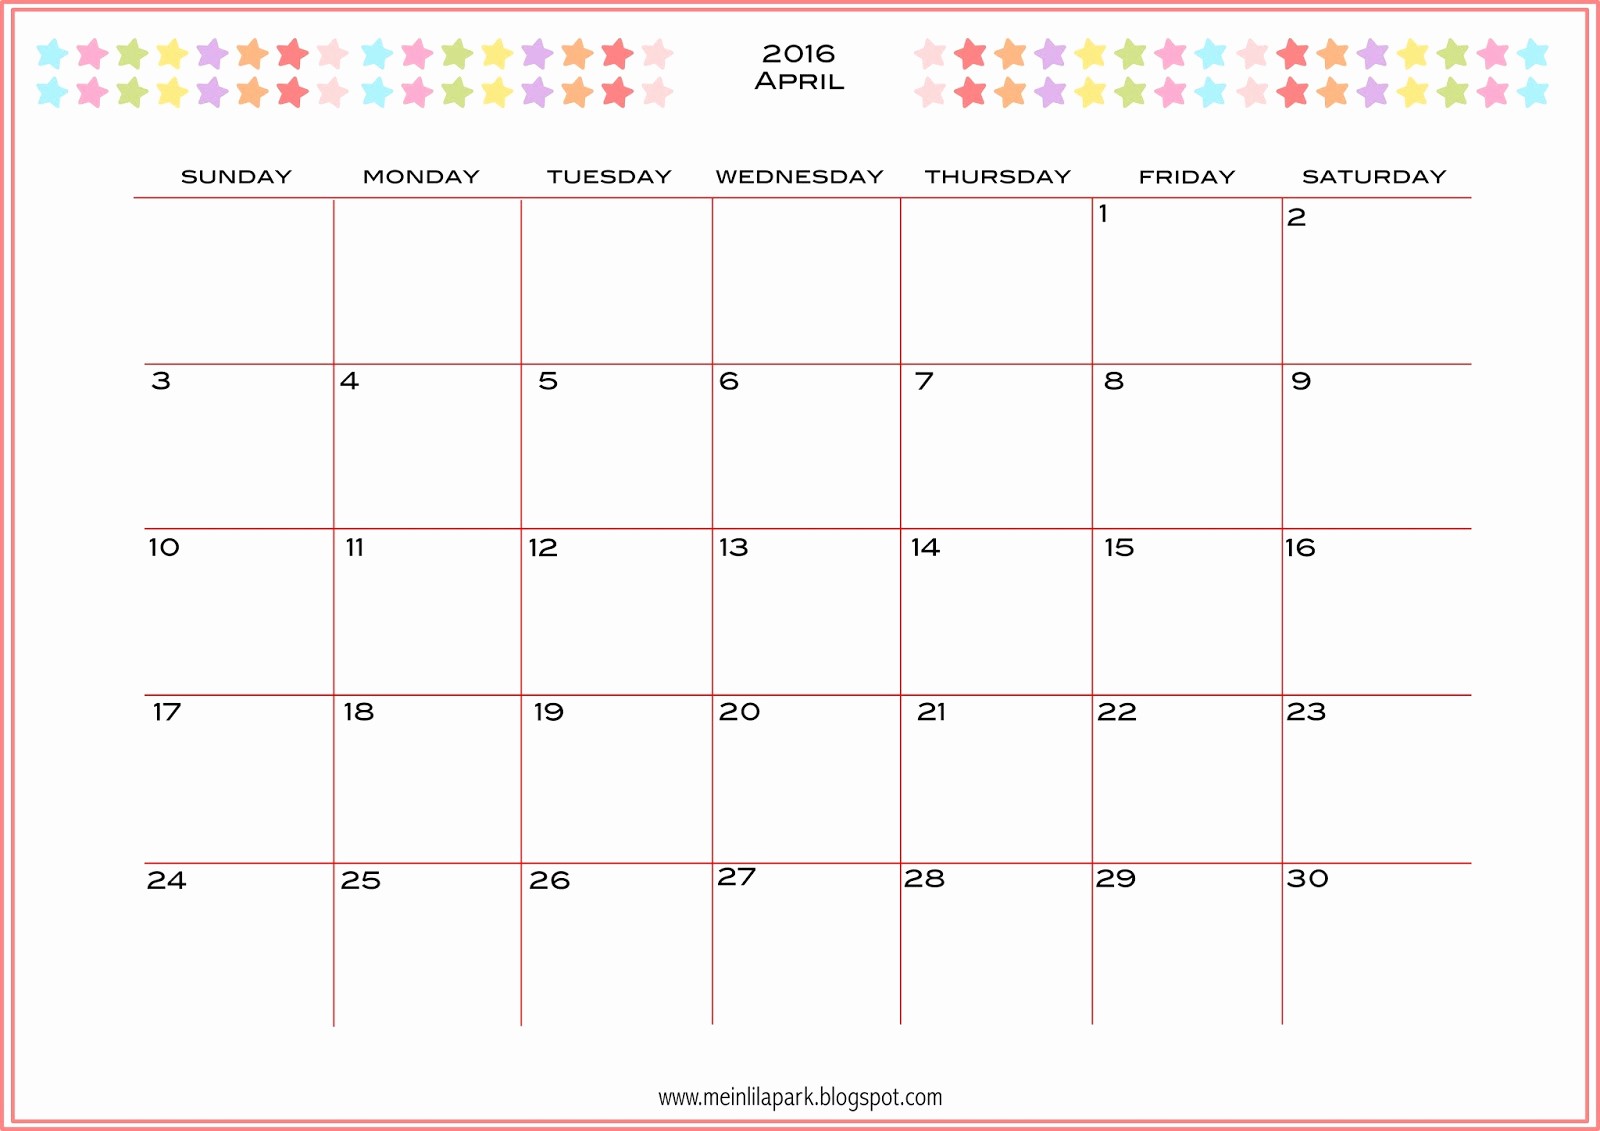 Monthly Calendar 2016 Printable Free Lovely Free Printable 2016 Planner Calendar Monthly Calendar